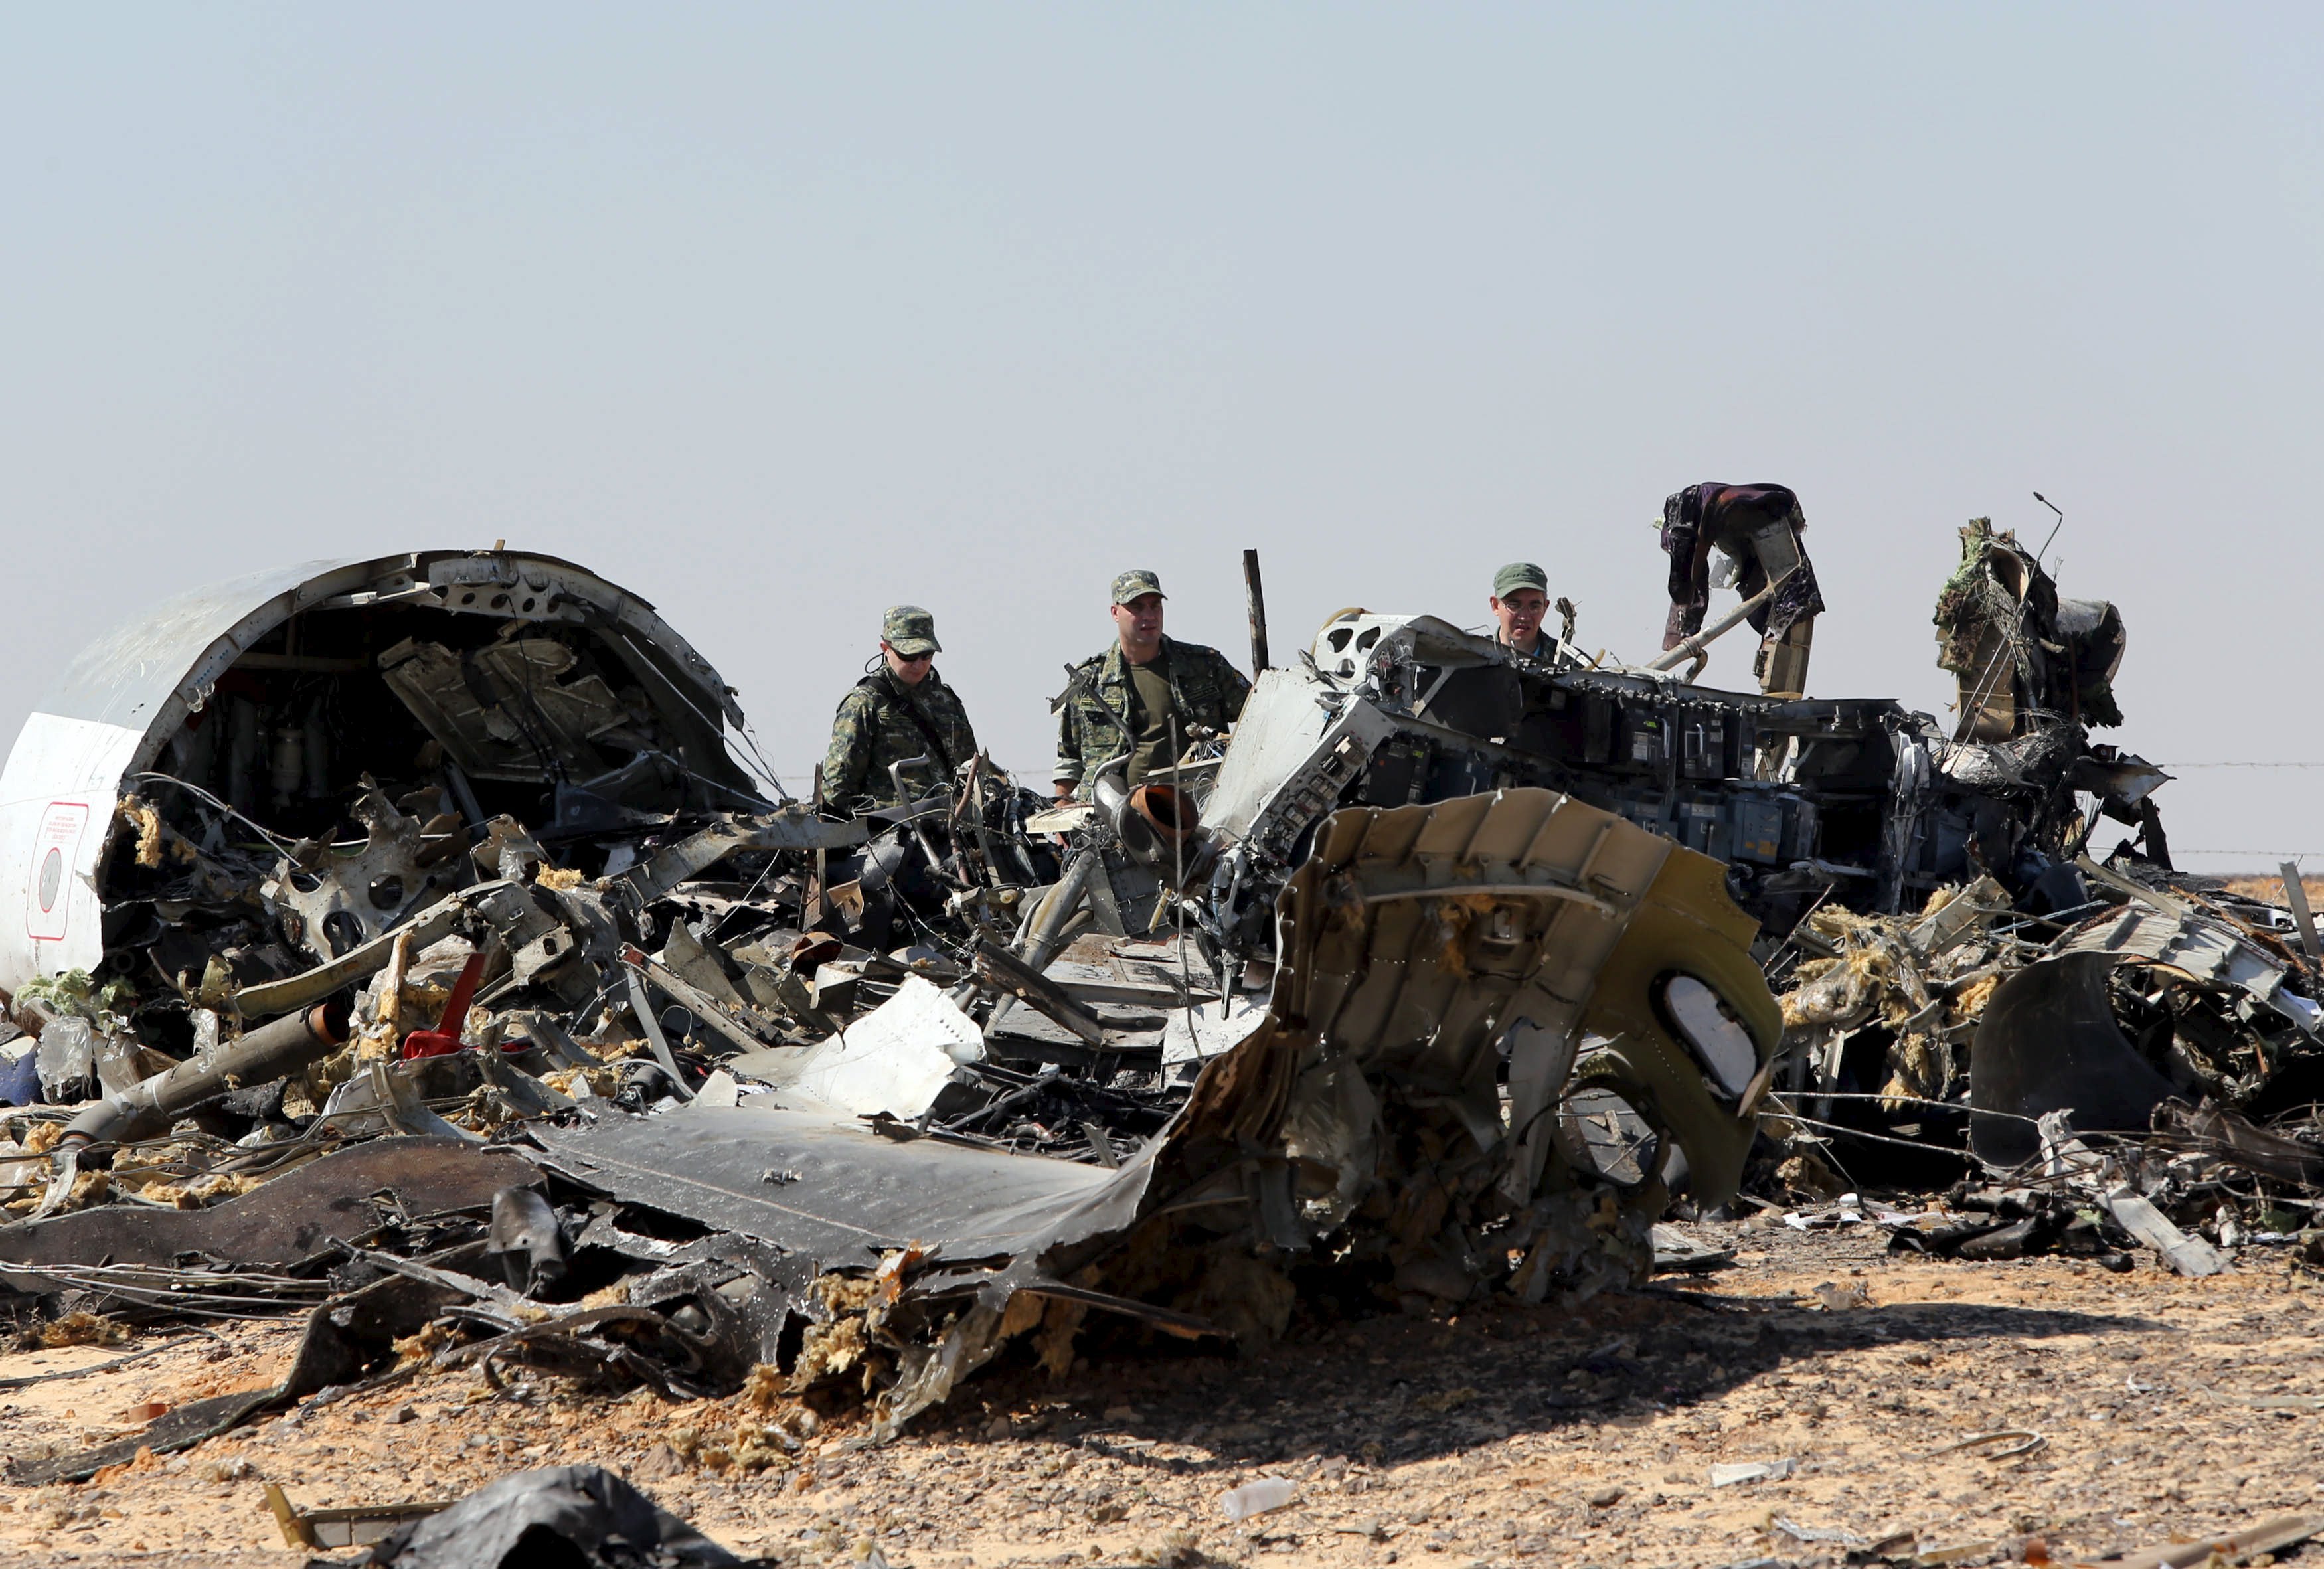 Military investigators from Russia stand near the debris of a Russian airliner at the crash site. Photo: Reuters